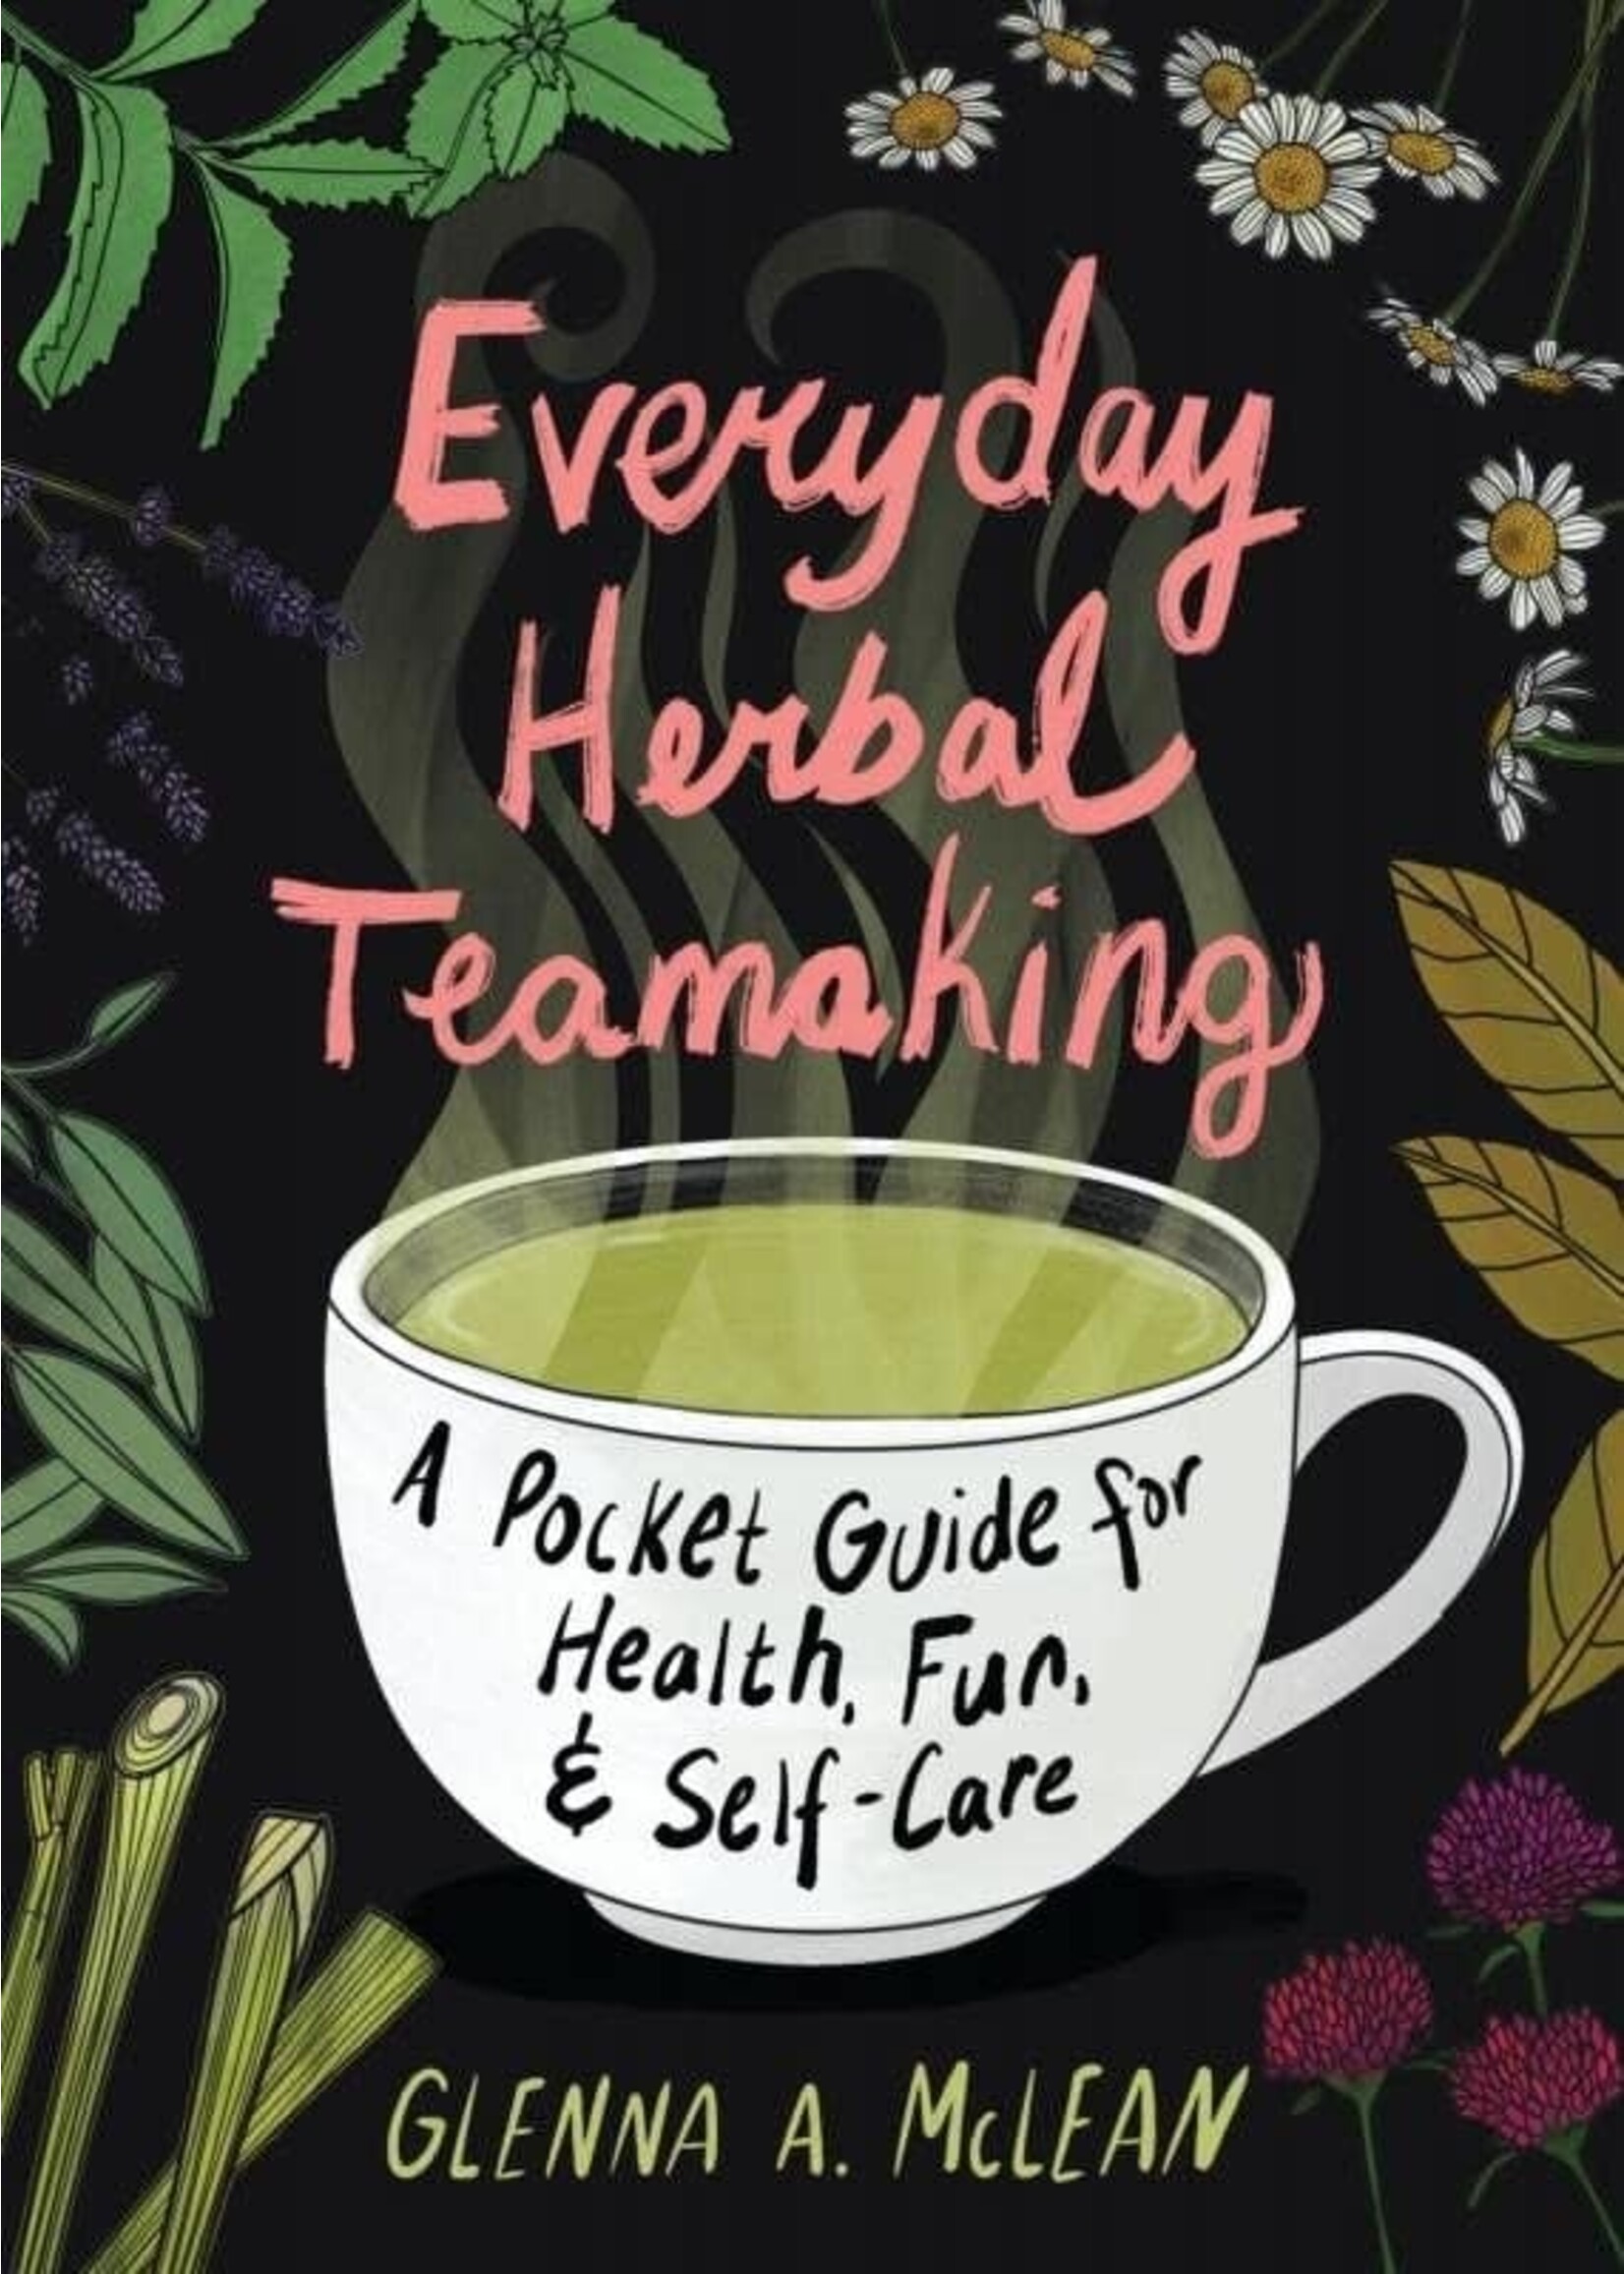 Everyday Herbal Teamaking: A Pocket Guide for Health, Fun, and Self-Care by Glenna A. McLean